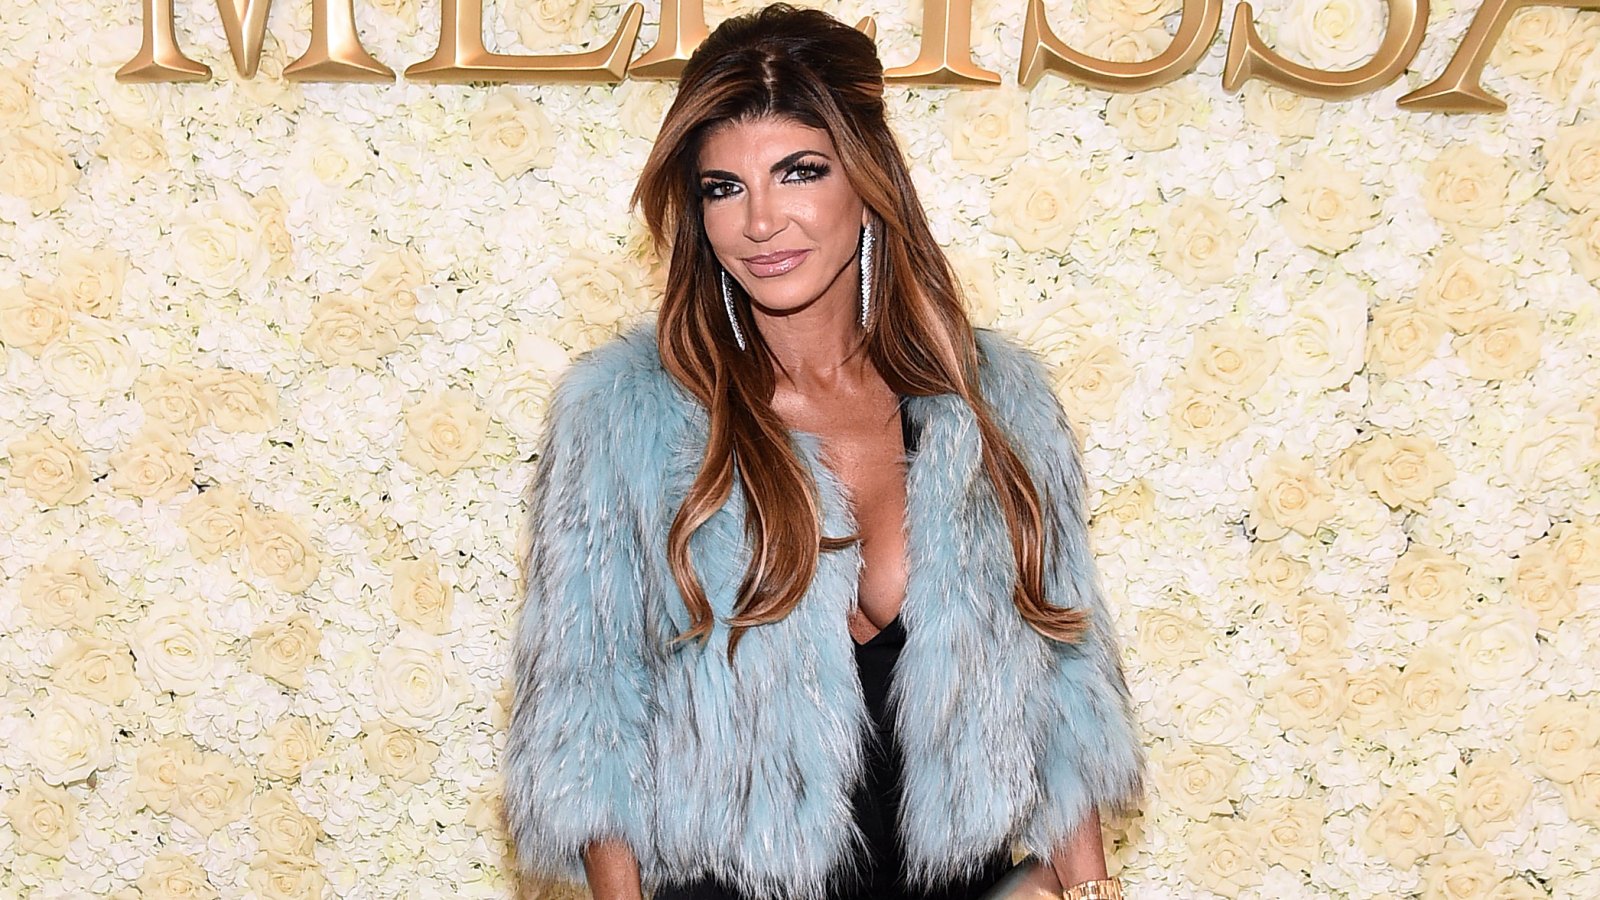 Teresa Giudice’s Daughter Calls Her the ‘Bravest’ As She Admits ‘Struggle’ on Mother’s Day